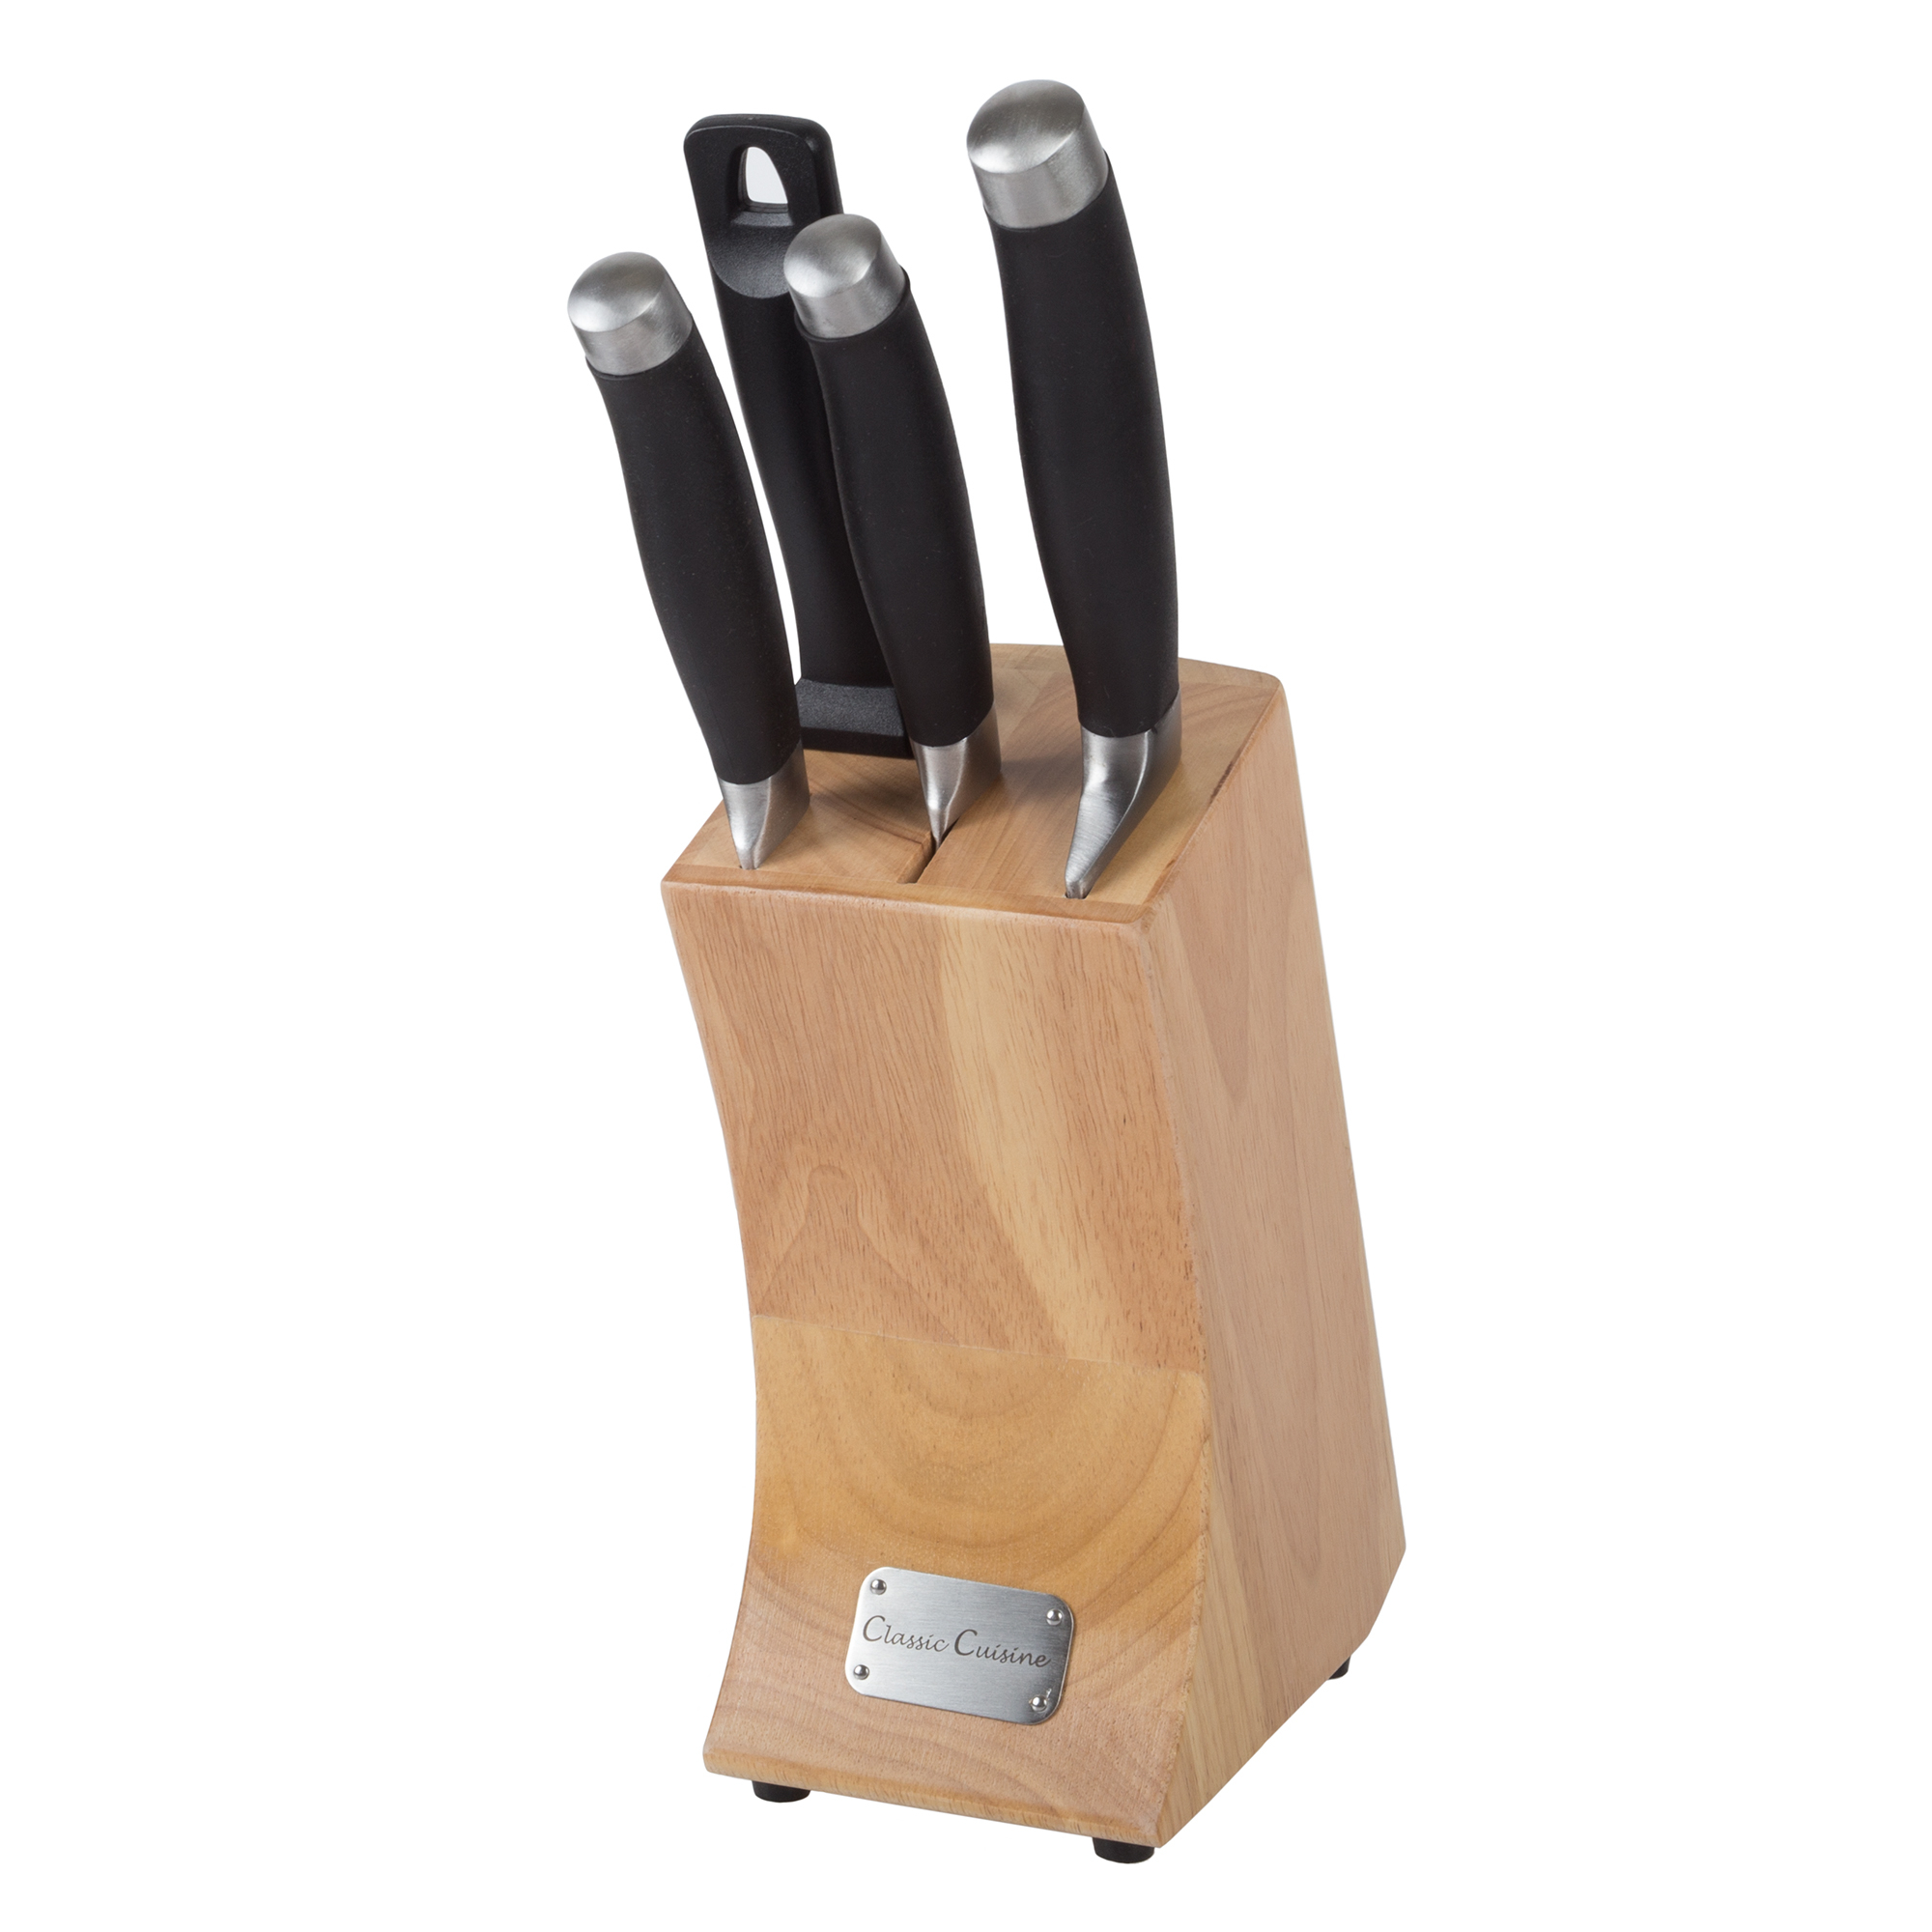 Professional Quality 5 Piece Stainless Steel Kitchen Knife Set with Sharper Paring Two Santoku Knives and Storage Wood Block